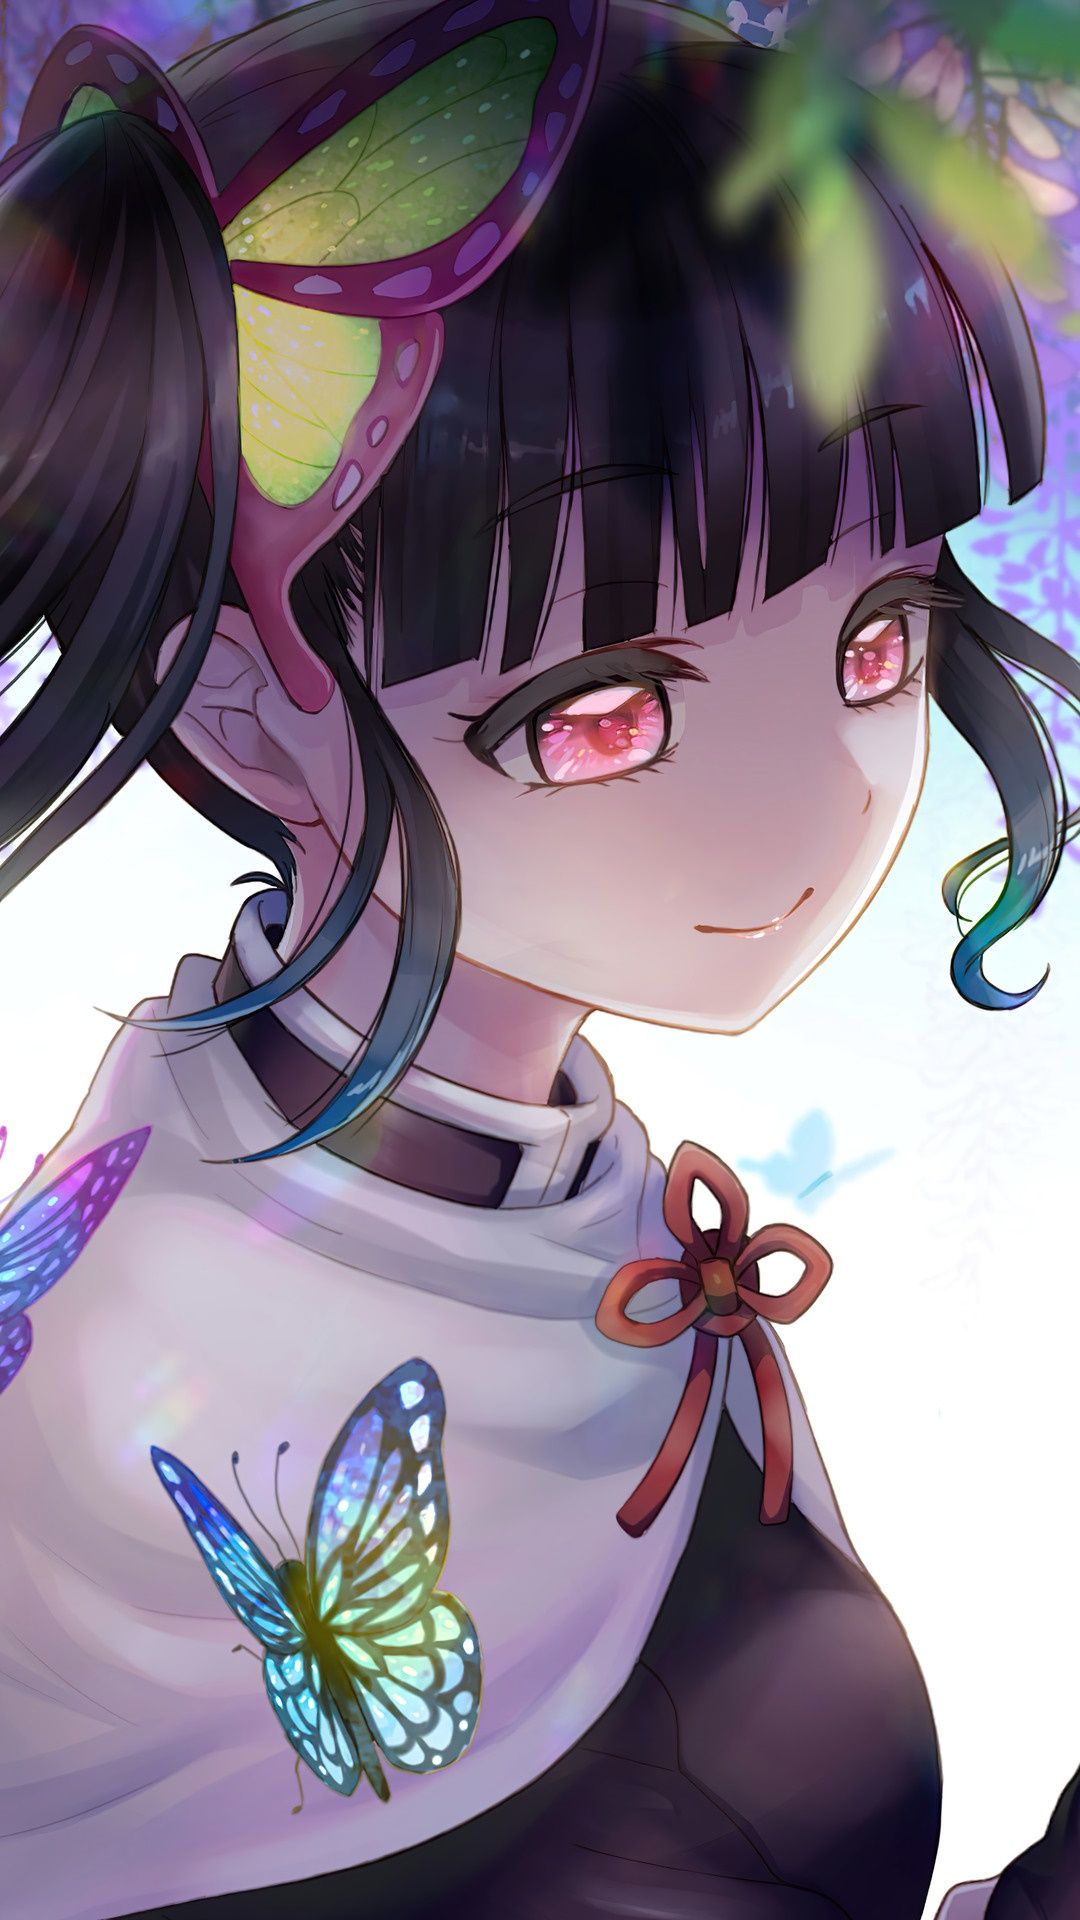 A girl with black hair and butterflies - Demon Slayer